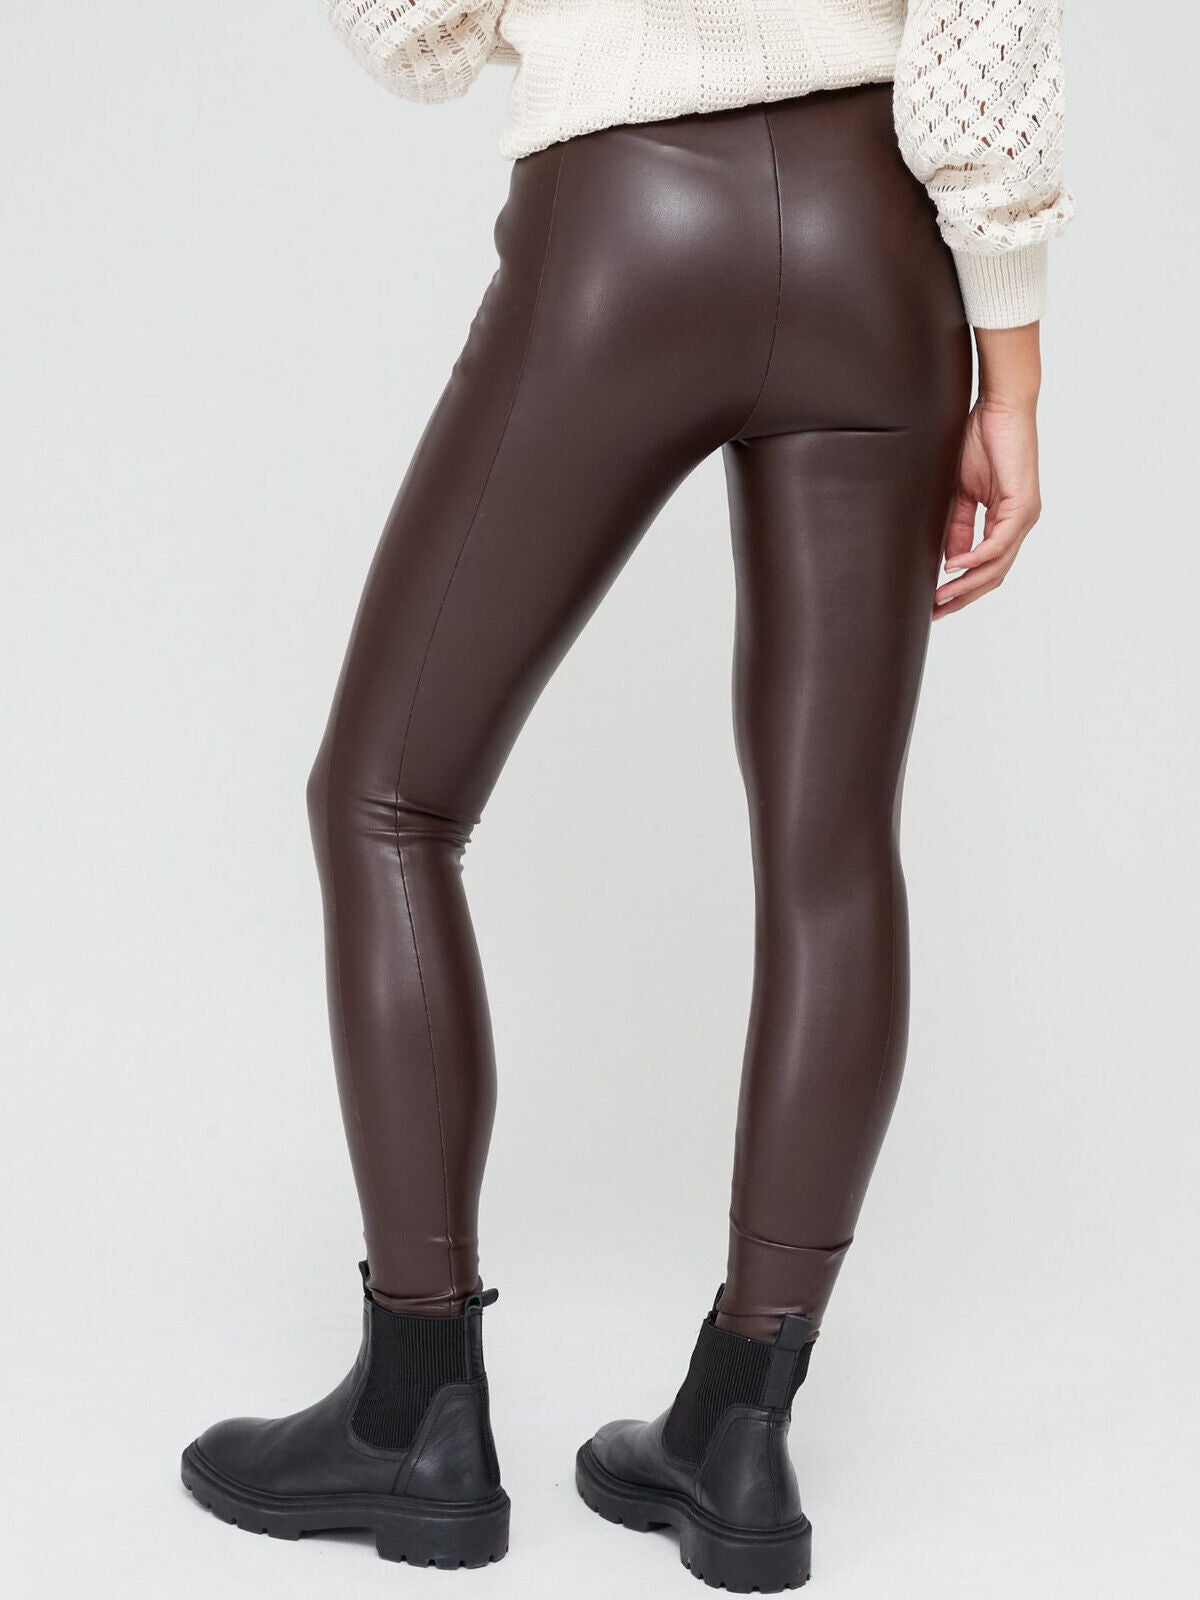 Everyday Faux Leather Legging - Oxblood Size 14.